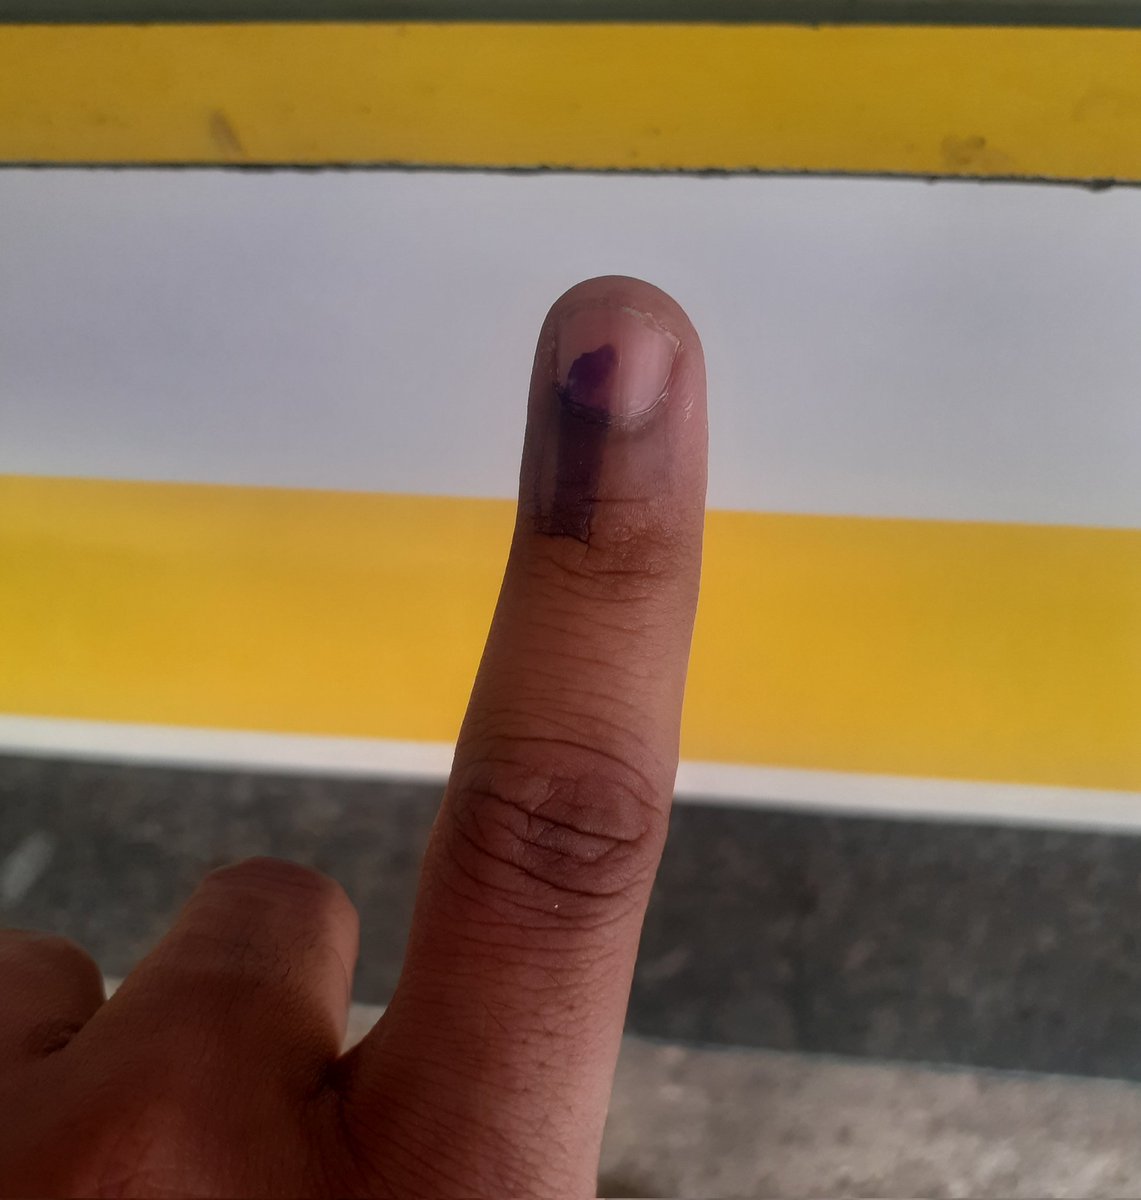 Voted for #NewIndia. Voted for #IndiaFirst.